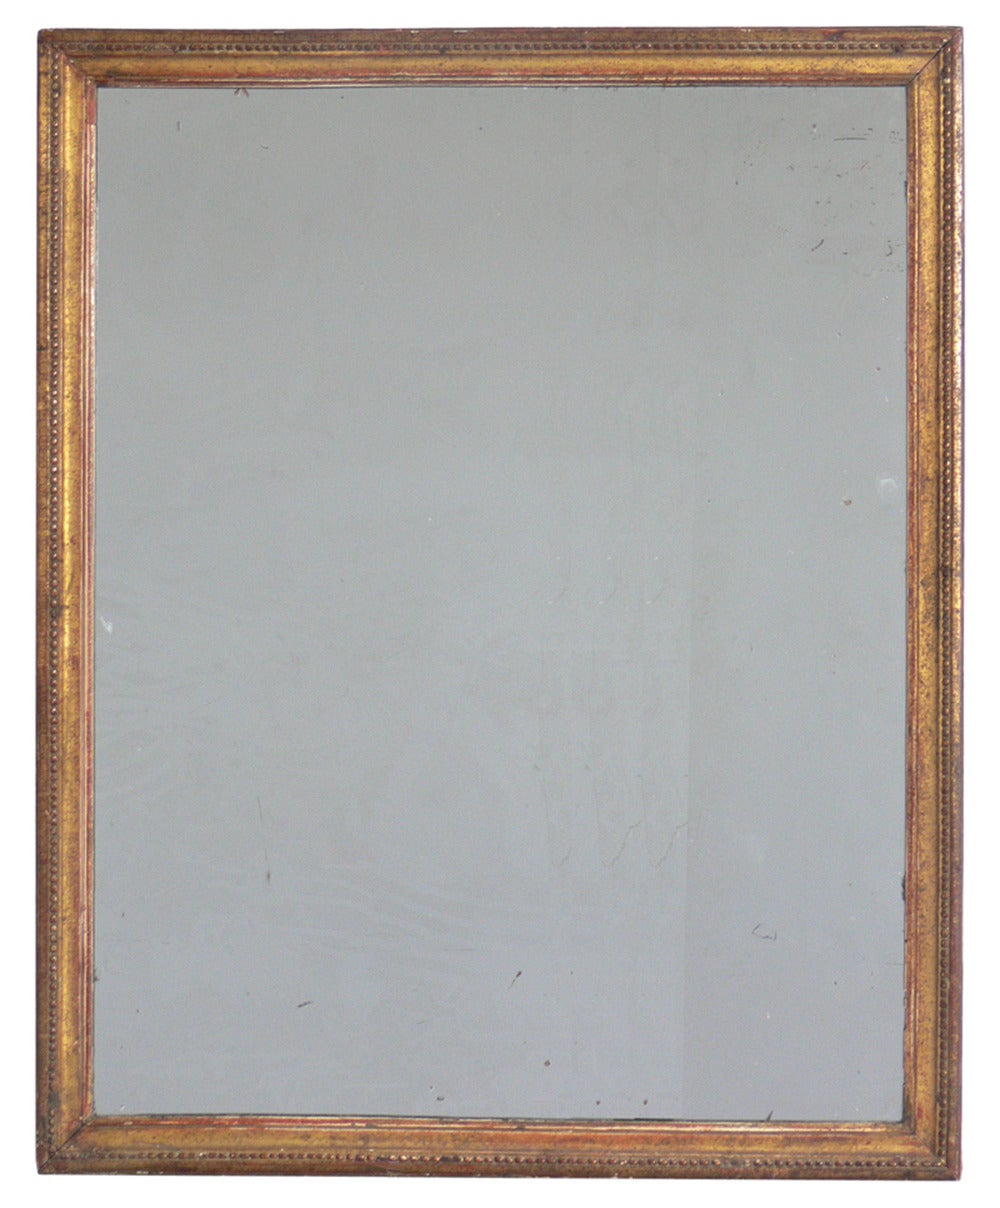 Hollywood Regency Selection of Vintage Gilt Mirrors